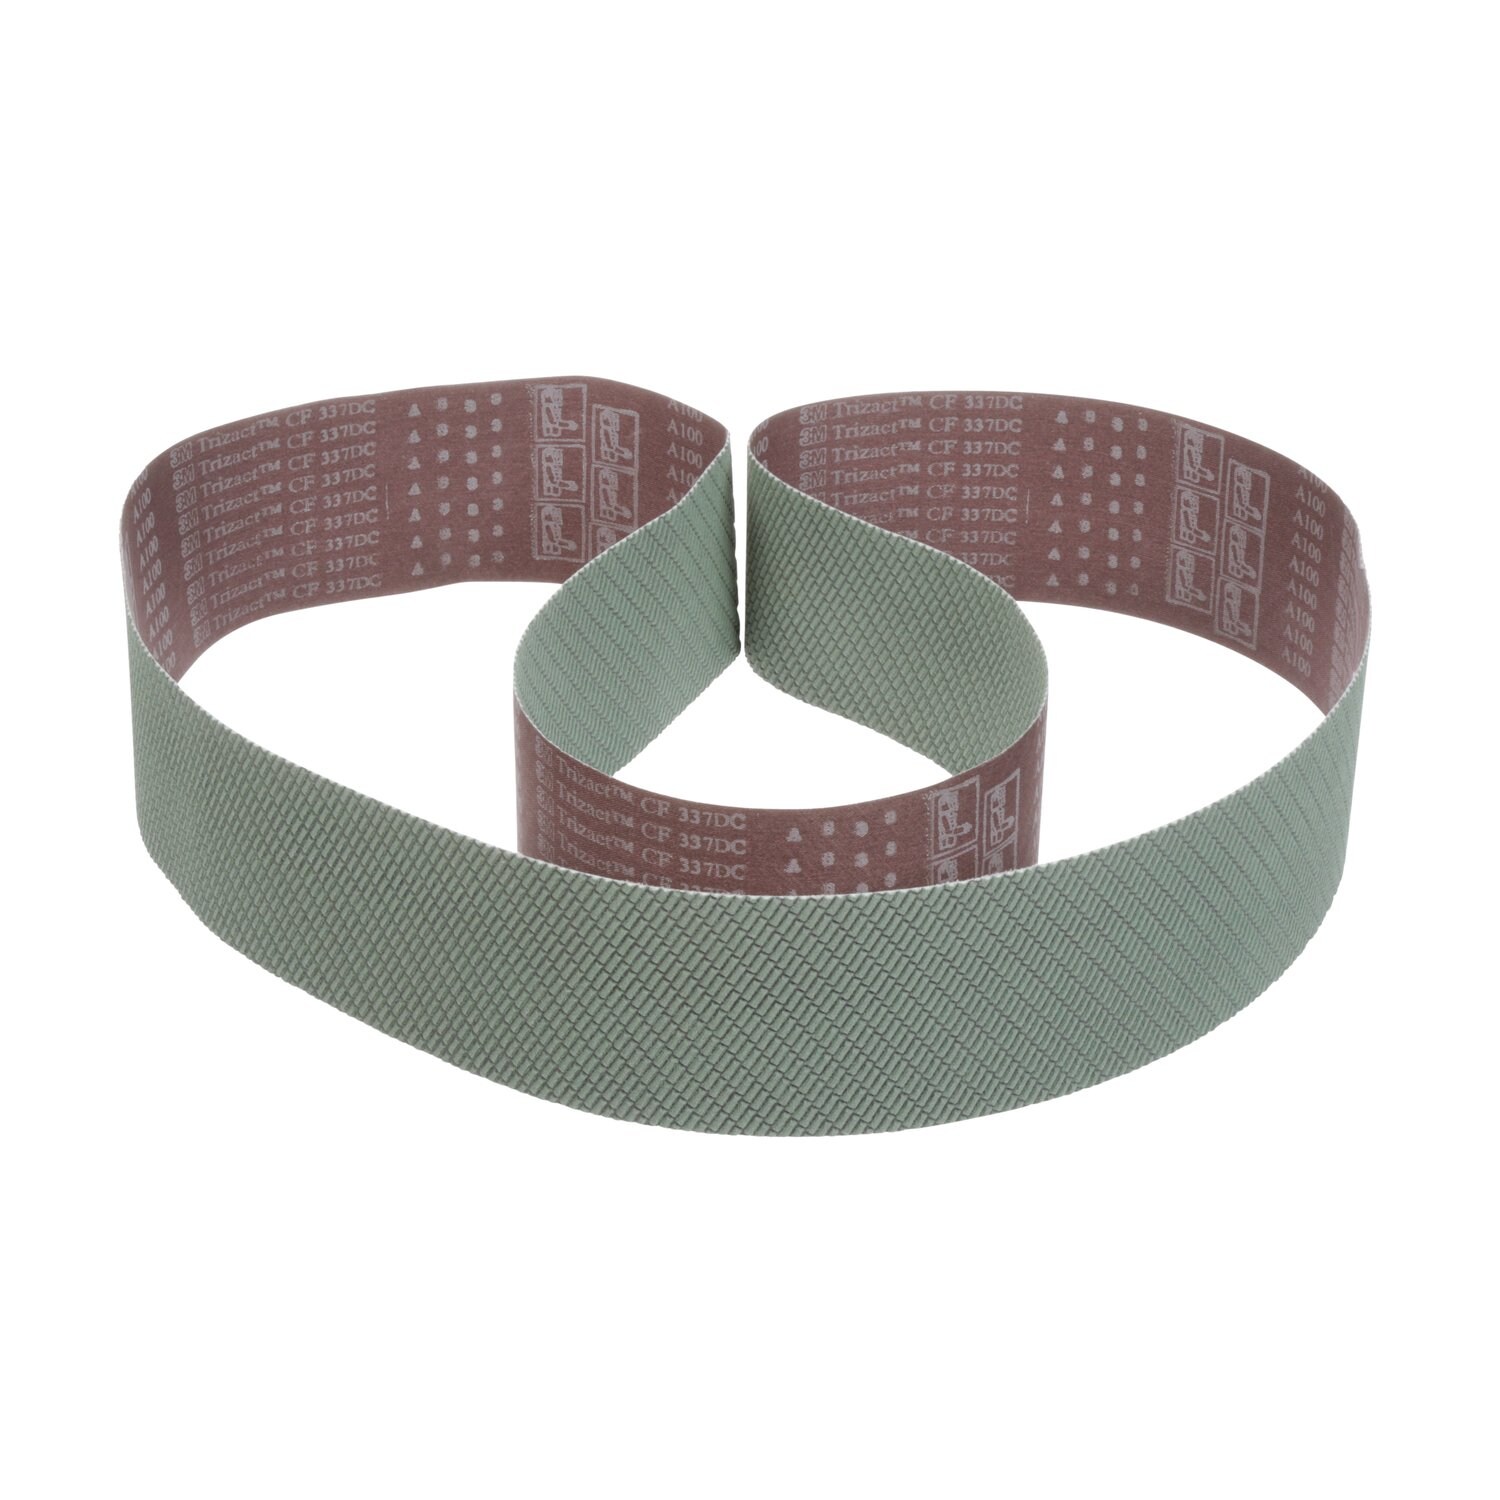 7100052829 - 3M Trizact Cloth Belt 337DC, A300 X-weight, Config